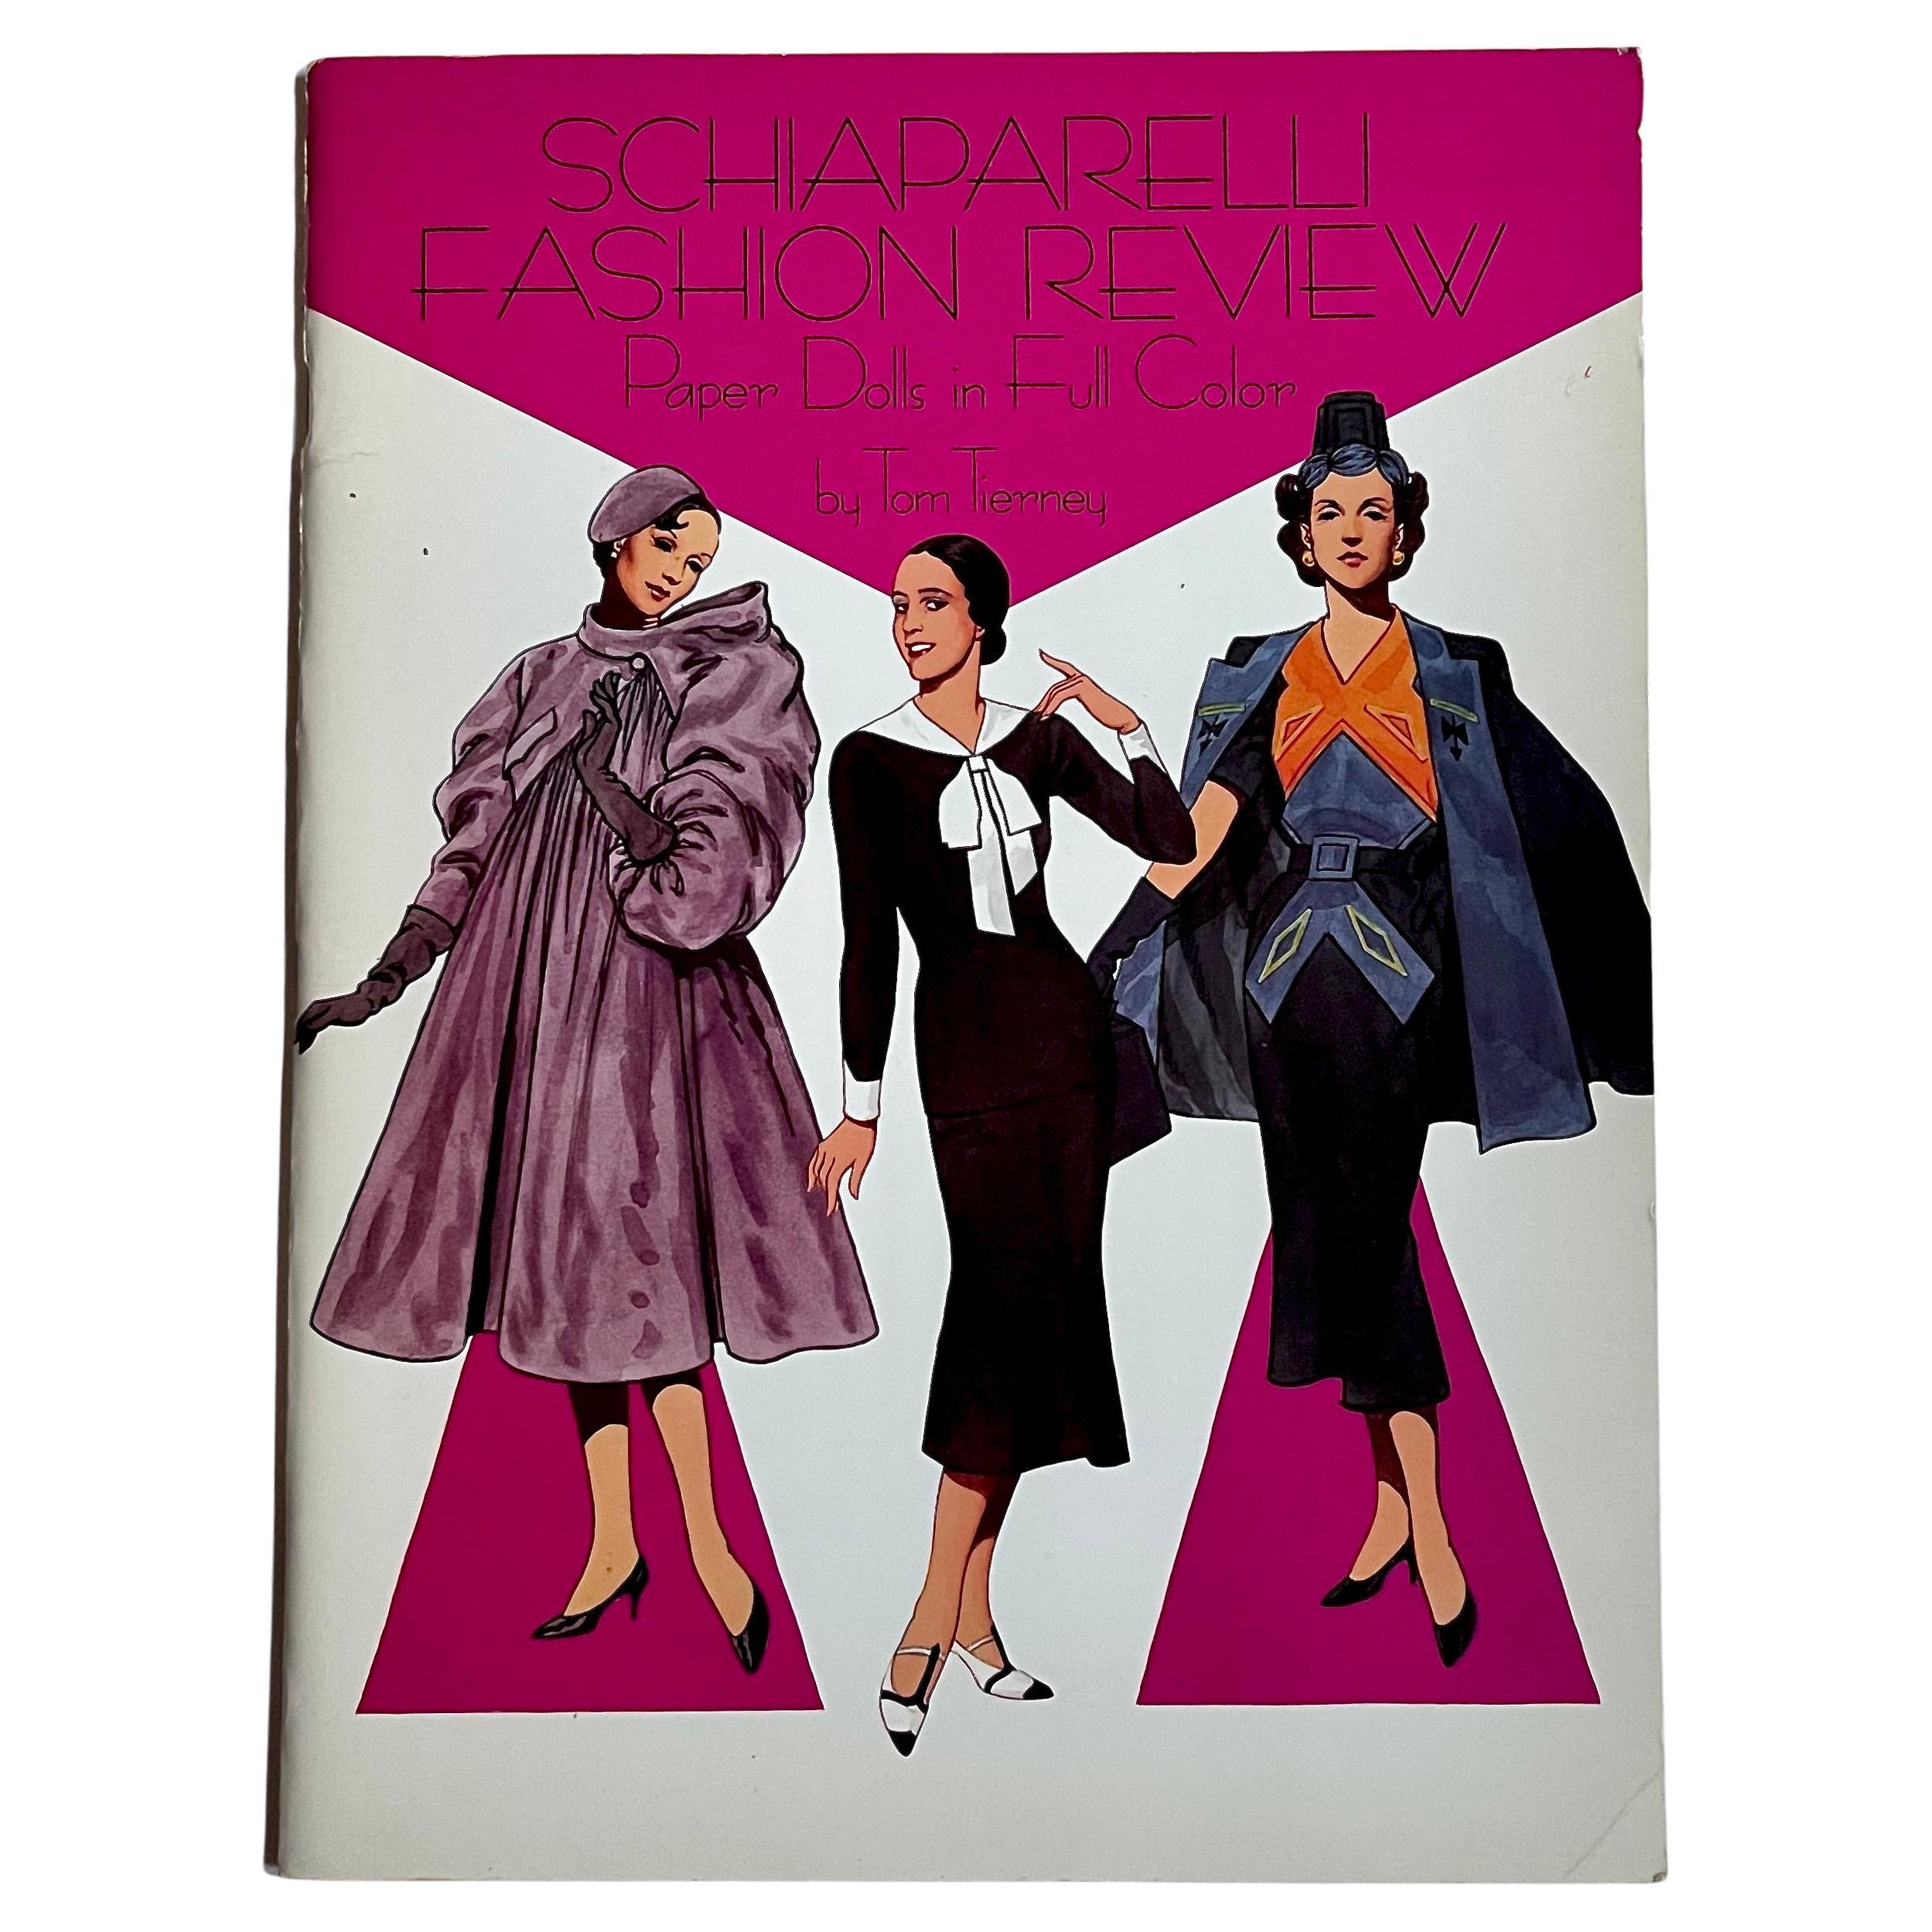 Schiaperelli Fashion Review Paper Dolls in Full Color, 1st Edition 1988 For Sale